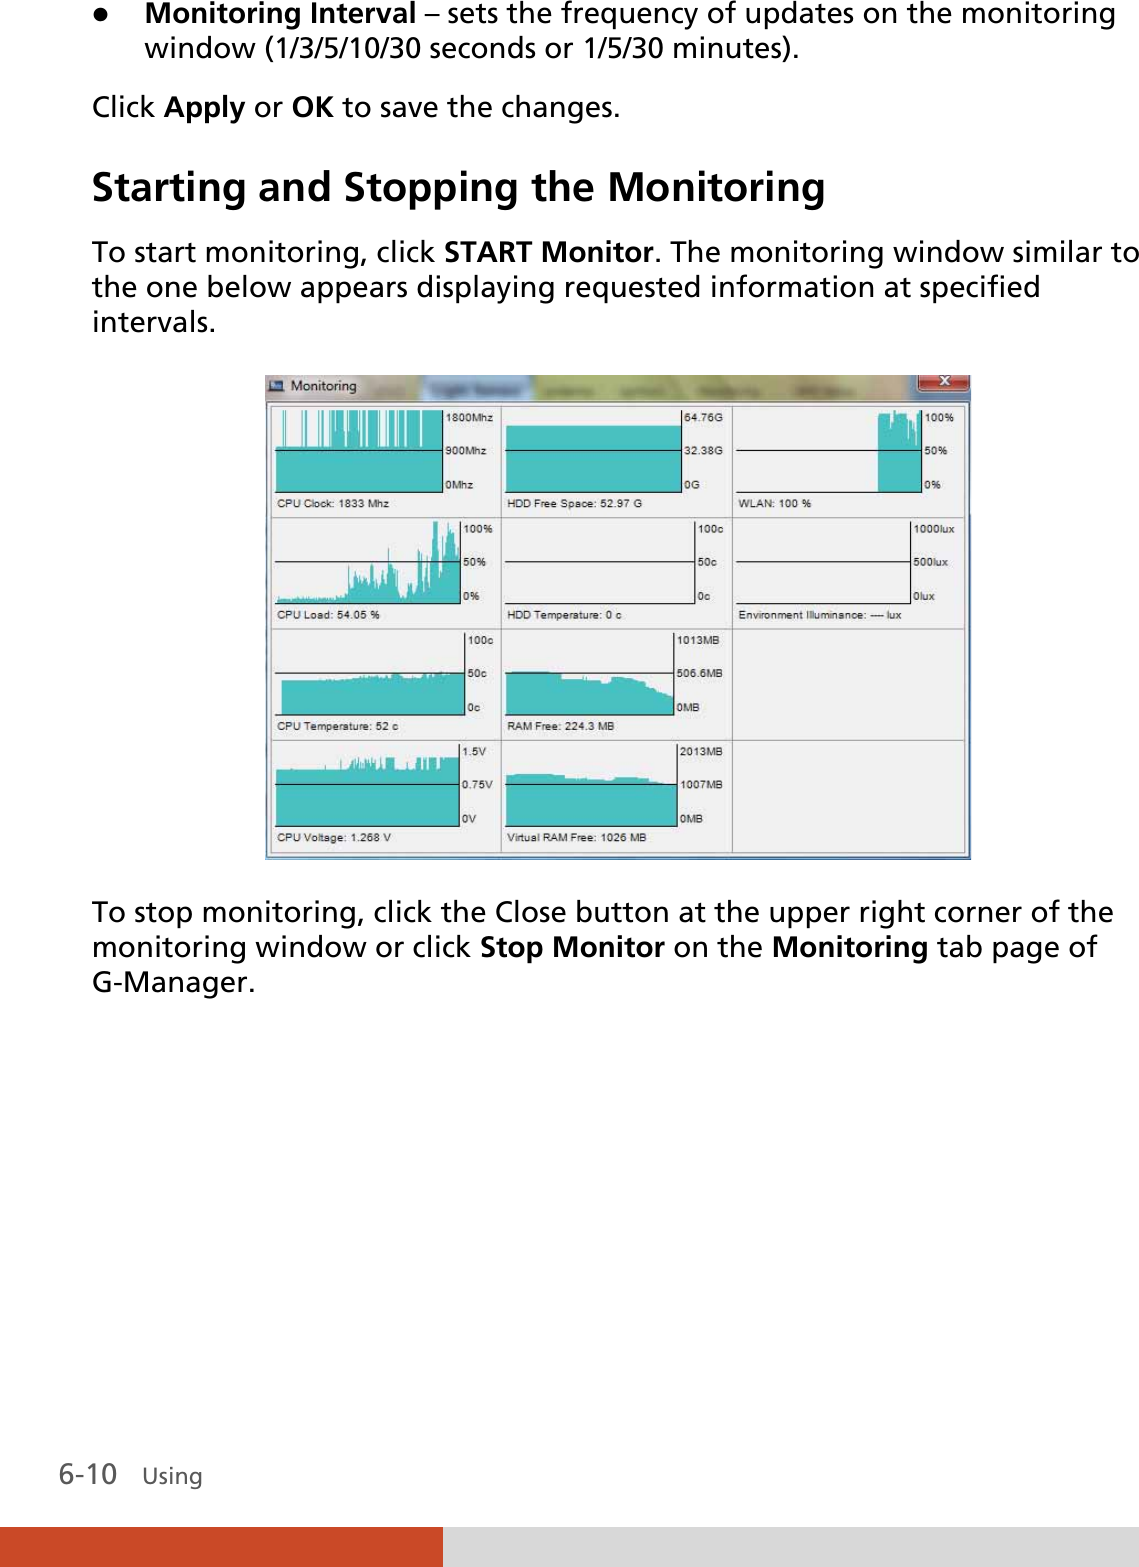  6-10   Using  z Monitoring Interval – sets the frequency of updates on the monitoring window (1/3/5/10/30 seconds or 1/5/30 minutes). Click Apply or OK to save the changes. Starting and Stopping the Monitoring To start monitoring, click START Monitor. The monitoring window similar to the one below appears displaying requested information at specified intervals.  To stop monitoring, click the Close button at the upper right corner of the monitoring window or click Stop Monitor on the Monitoring tab page of G-Manager.      